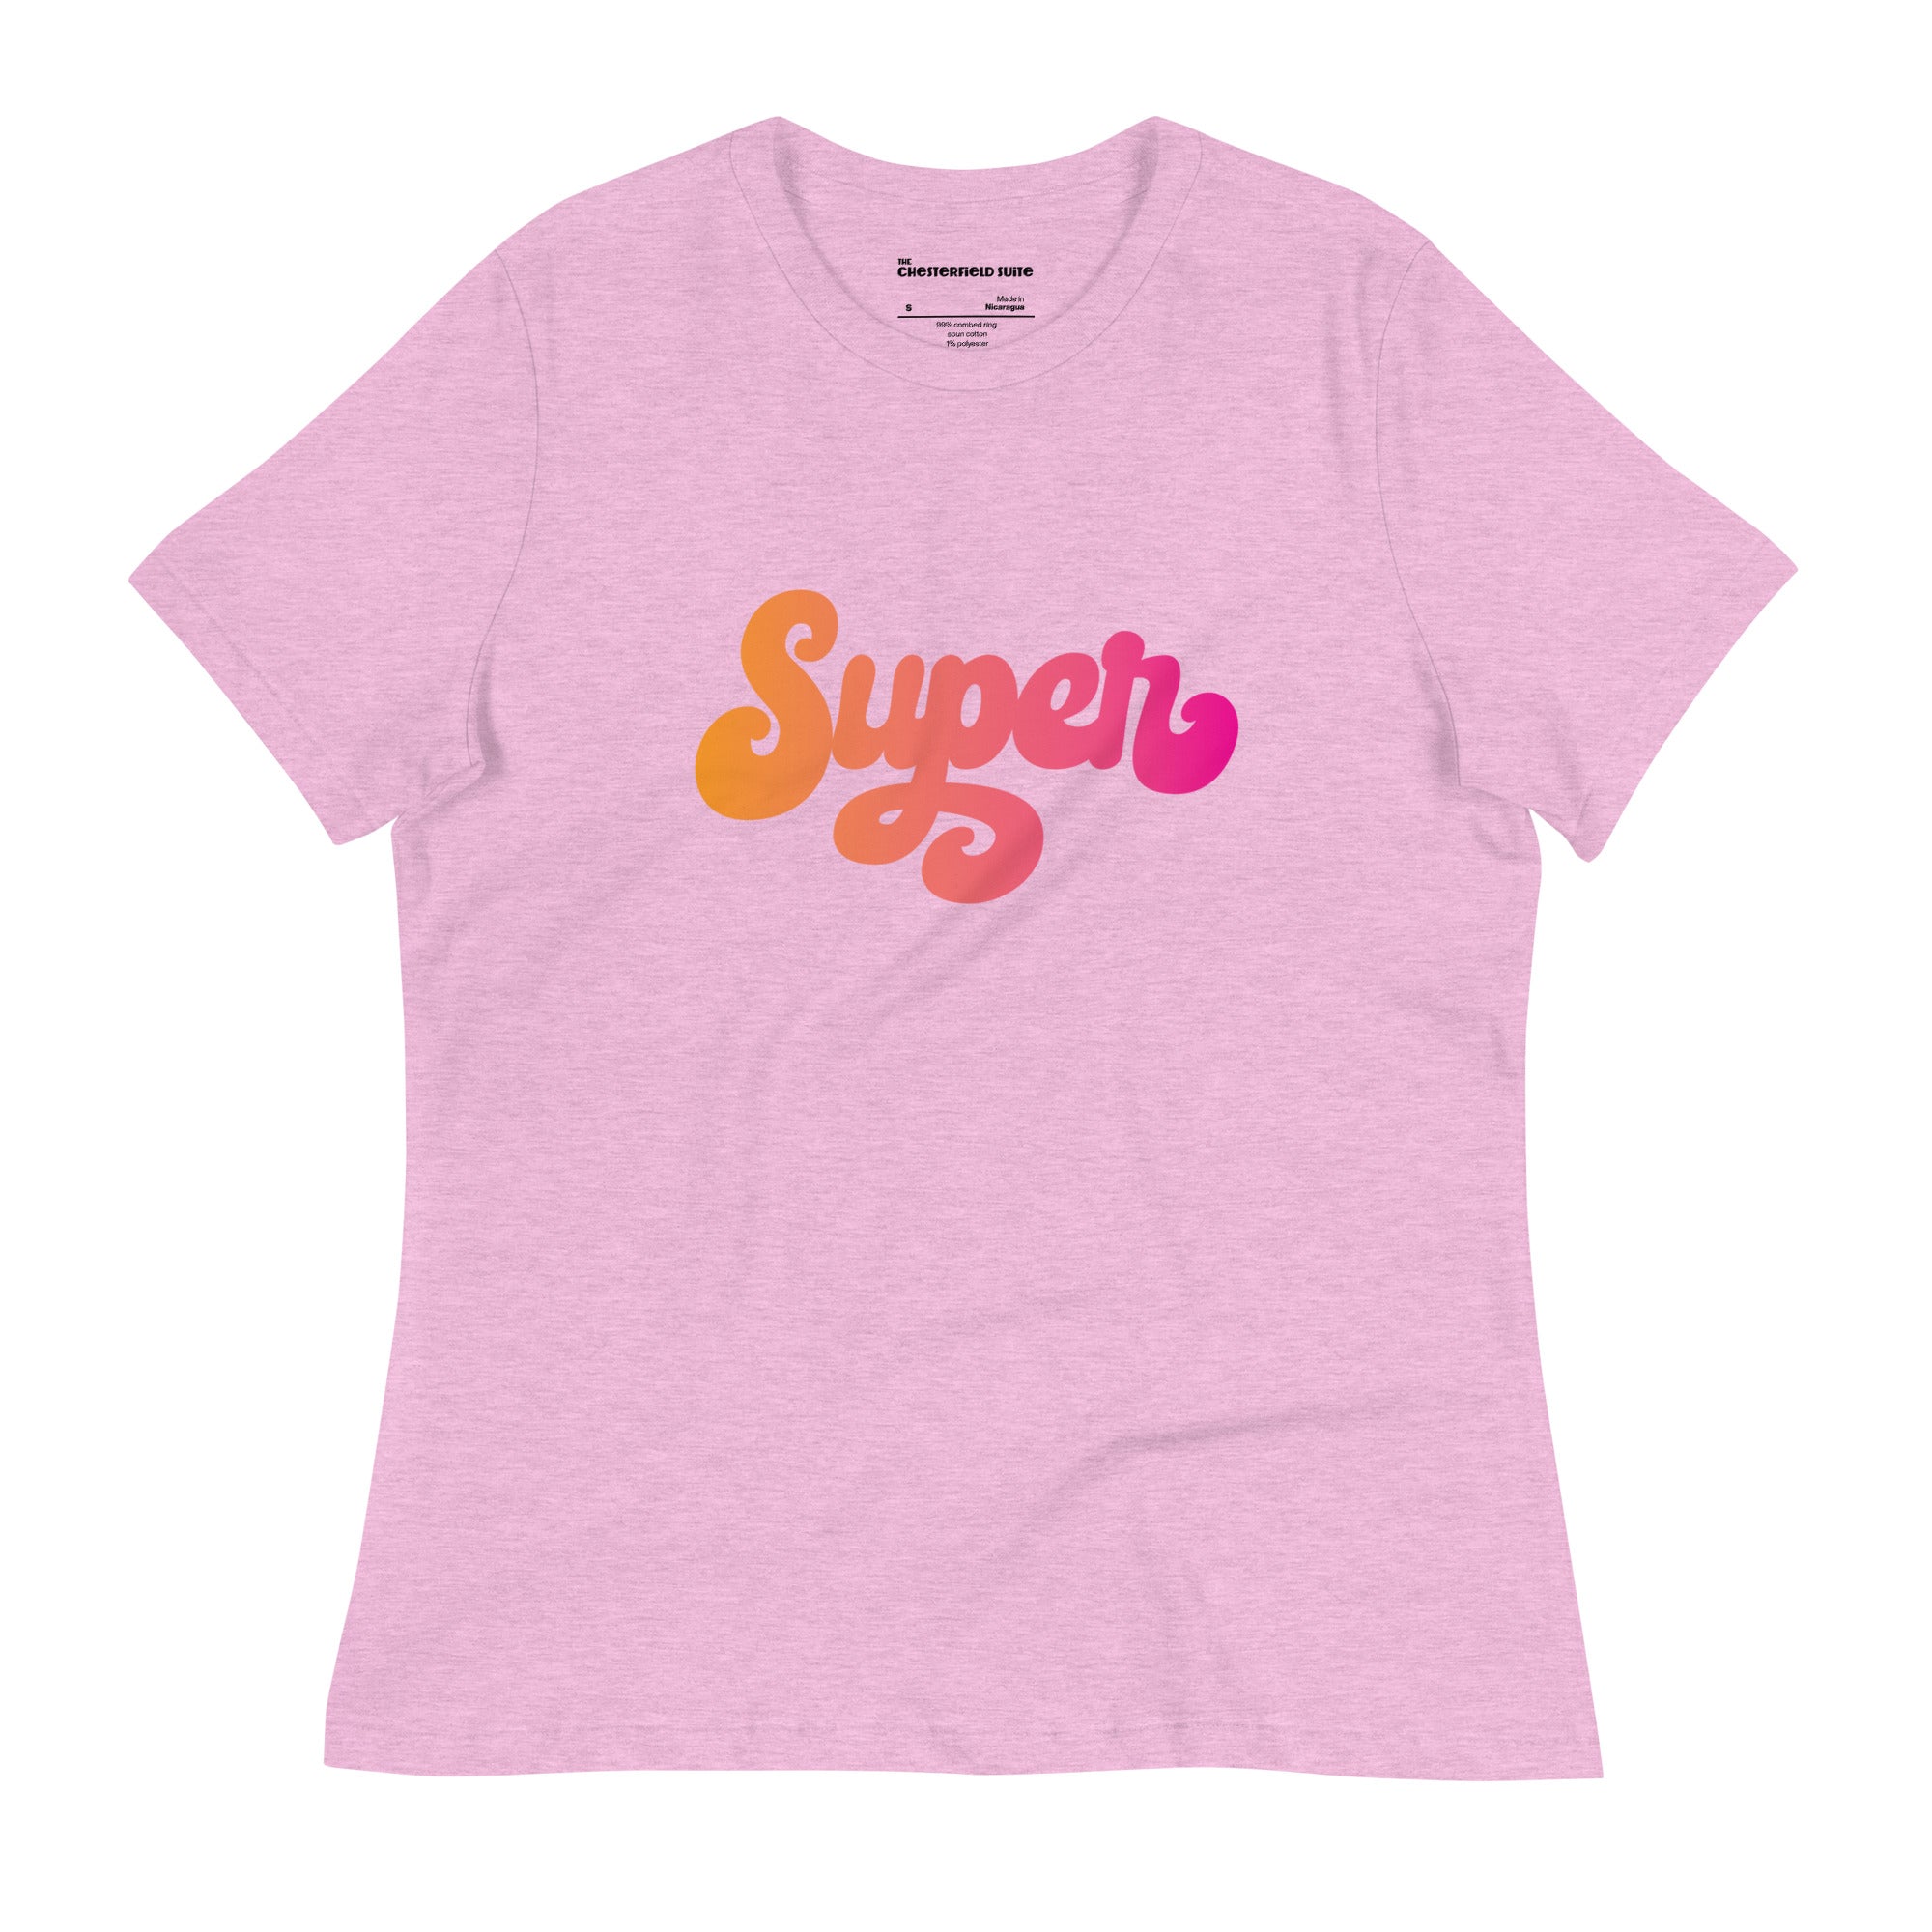 the word Super written in a pink blend cursive lettering on pink women's t-shirt